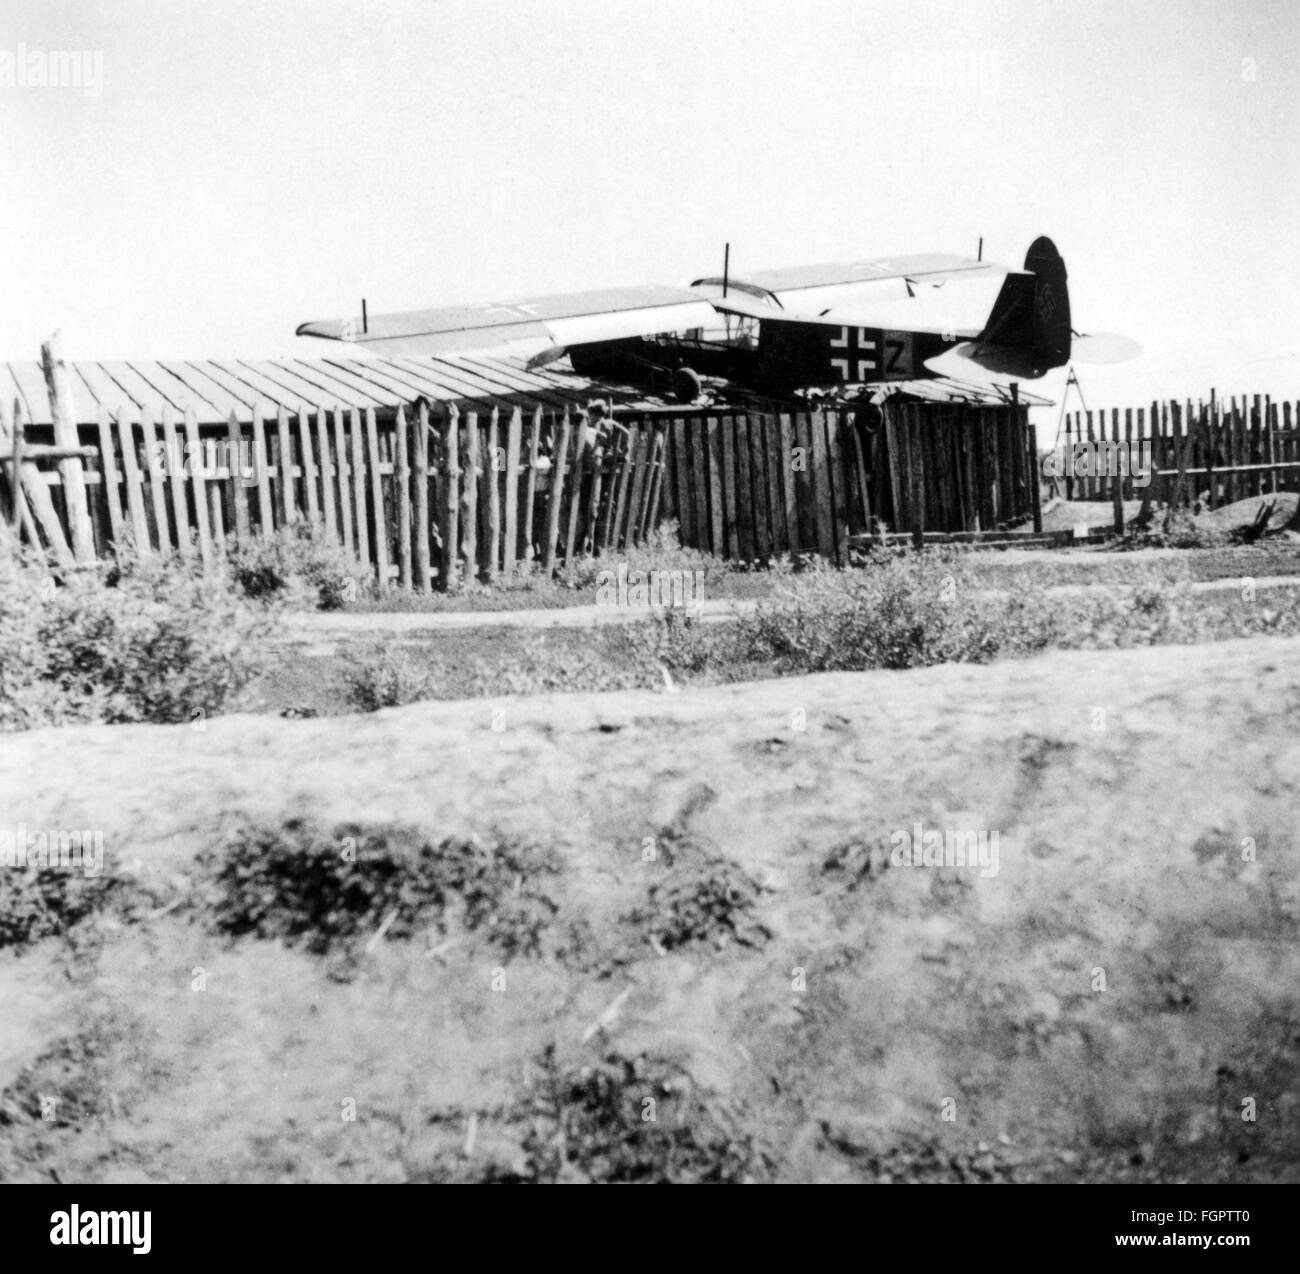 Second World War / WWII, Soviet Union, 1st Panzer Army, Army Group South, Ukraine, summer 1941, liaison aircraft Fieseler Fi 156 'Storch', crash-landed on the roof of a shed, Additional-Rights-Clearences-Not Available Stock Photo